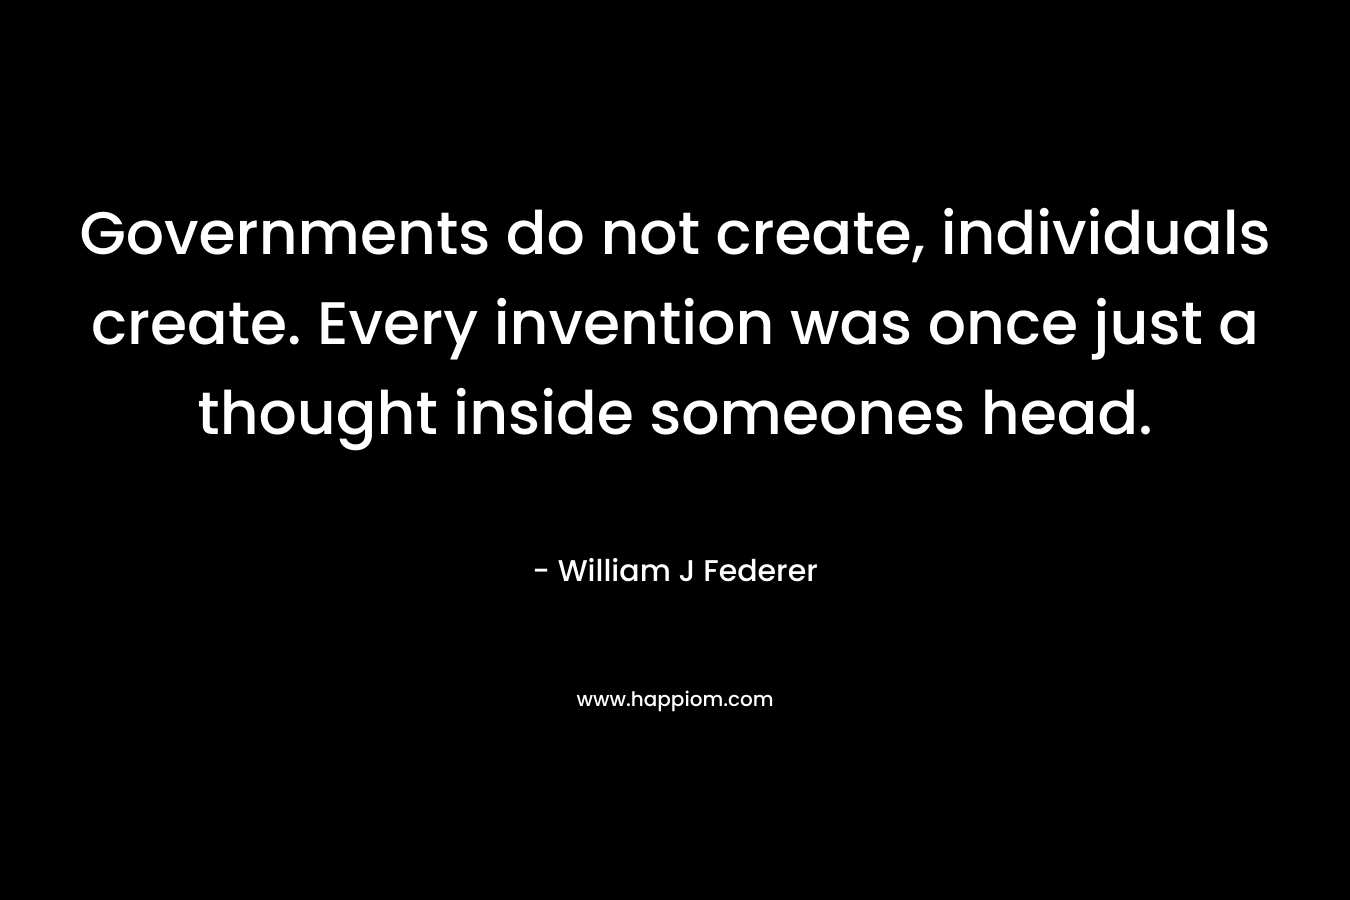 Governments do not create, individuals create. Every invention was once just a thought inside someones head.